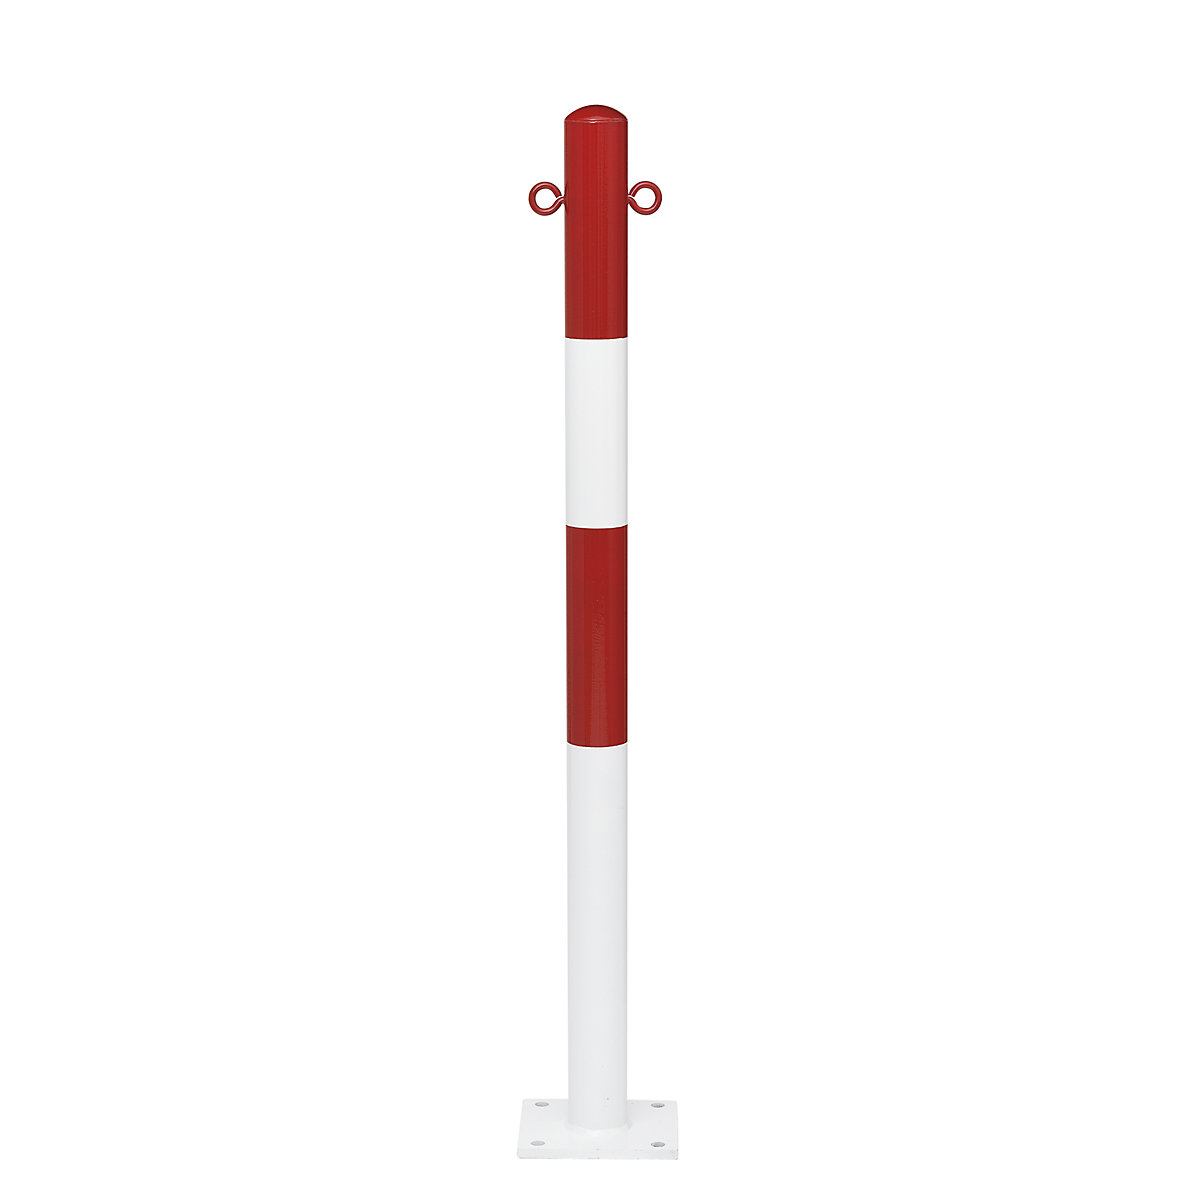 Barrier post, for bolting in place, Ø 90 mm, red/white plastic coated, 2 eyelets-15